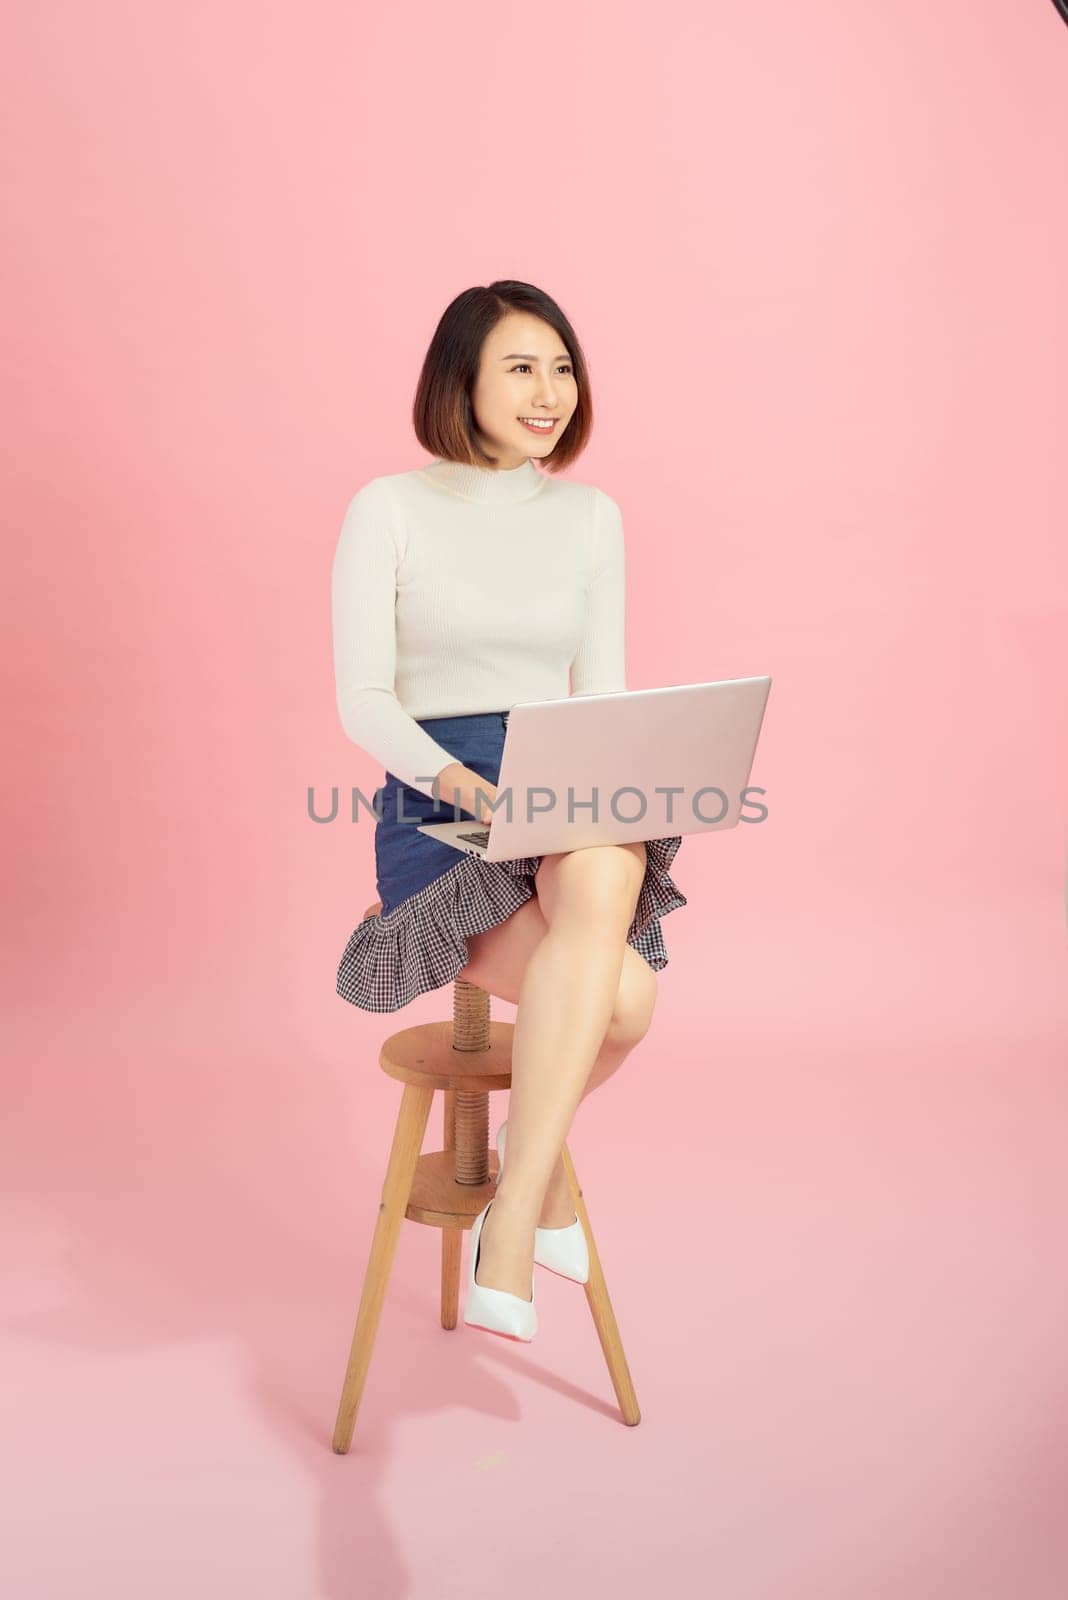 Young beautiful Asian businesswoman using laptop while sitting on chair. Isolated on pink background.